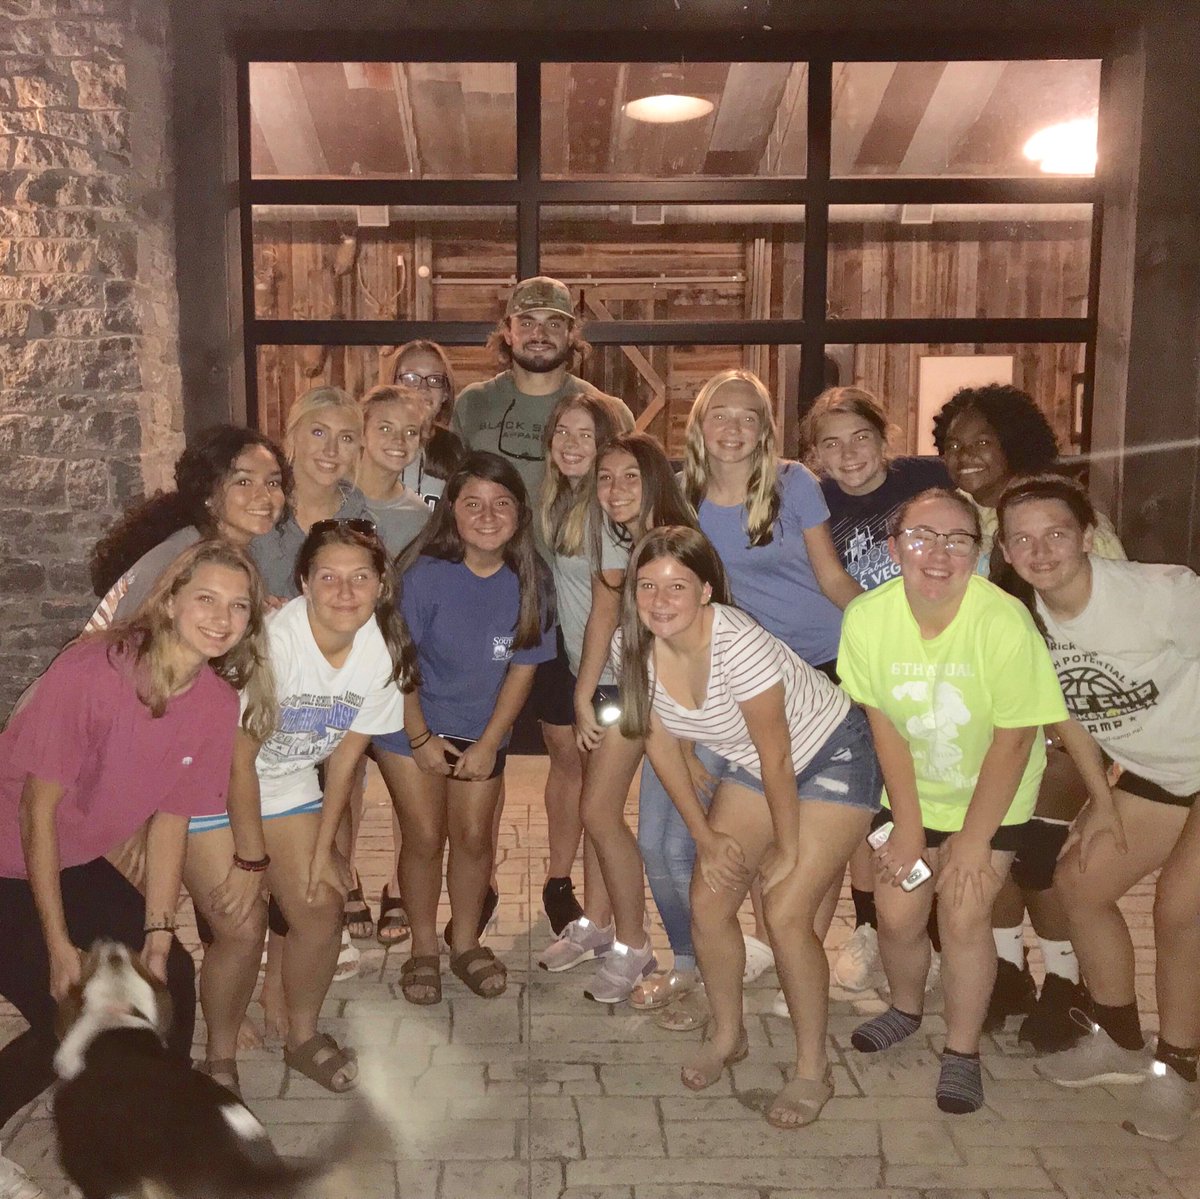 Oh... we also hung out with our friend @KashDaniel15 😎 #ladyjaguarsoccer